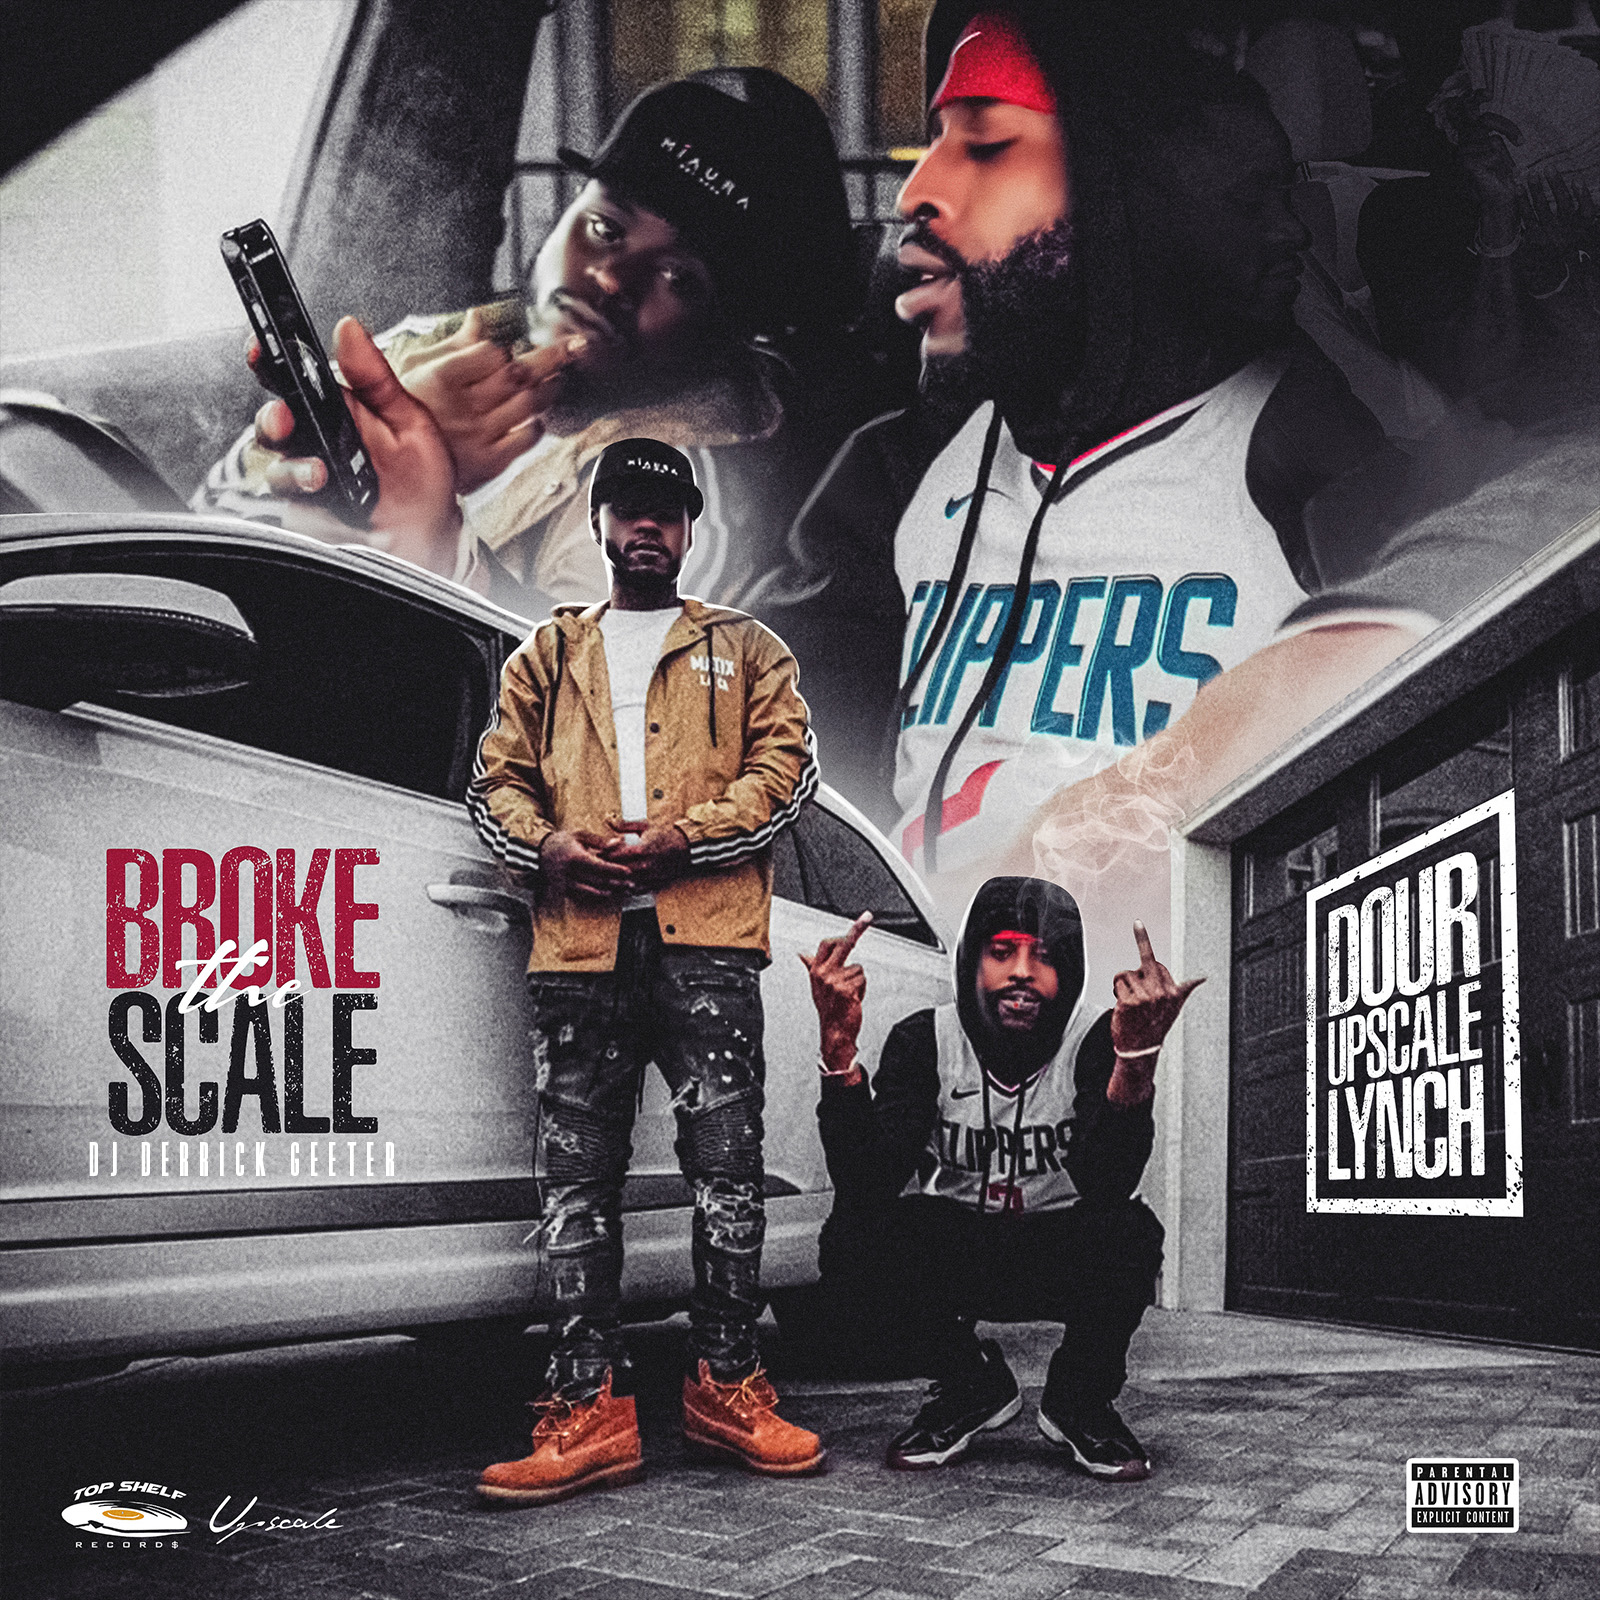 Upscale Lynch & Dour - Broke The Scale Cover Art